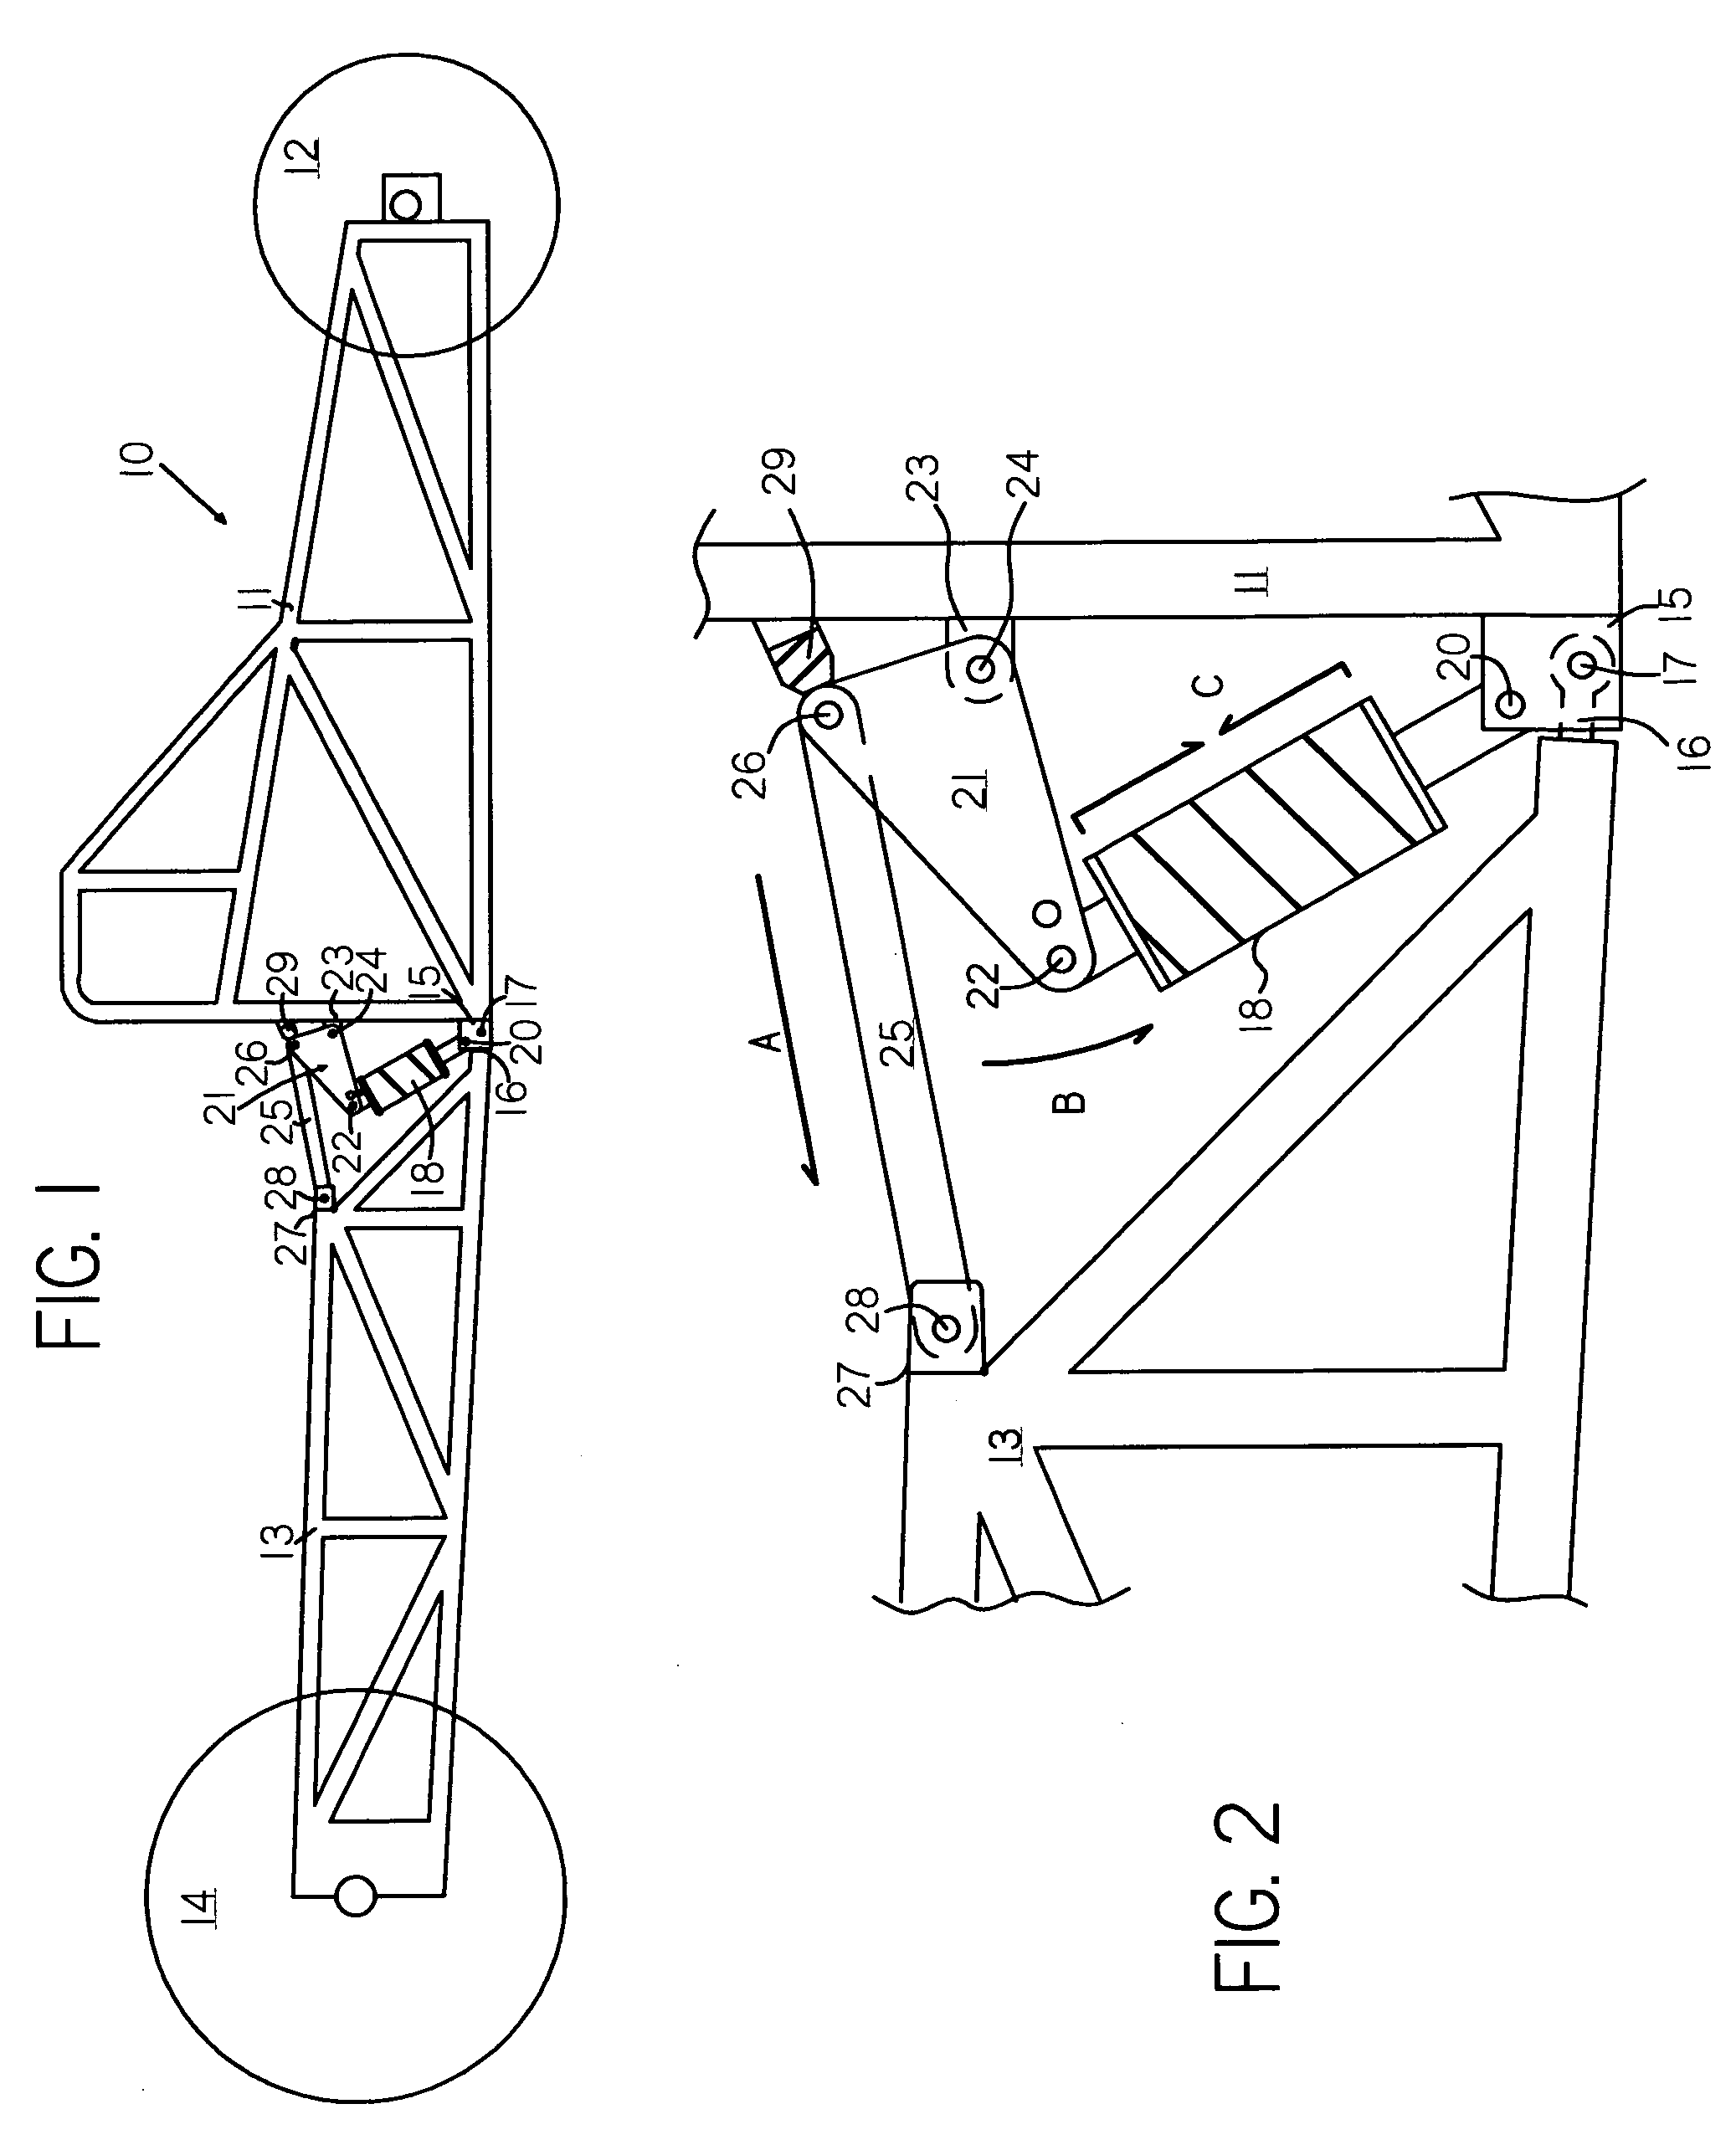 Tunable suspension system for enhanced acceleration characteristics of wheeled vehicles